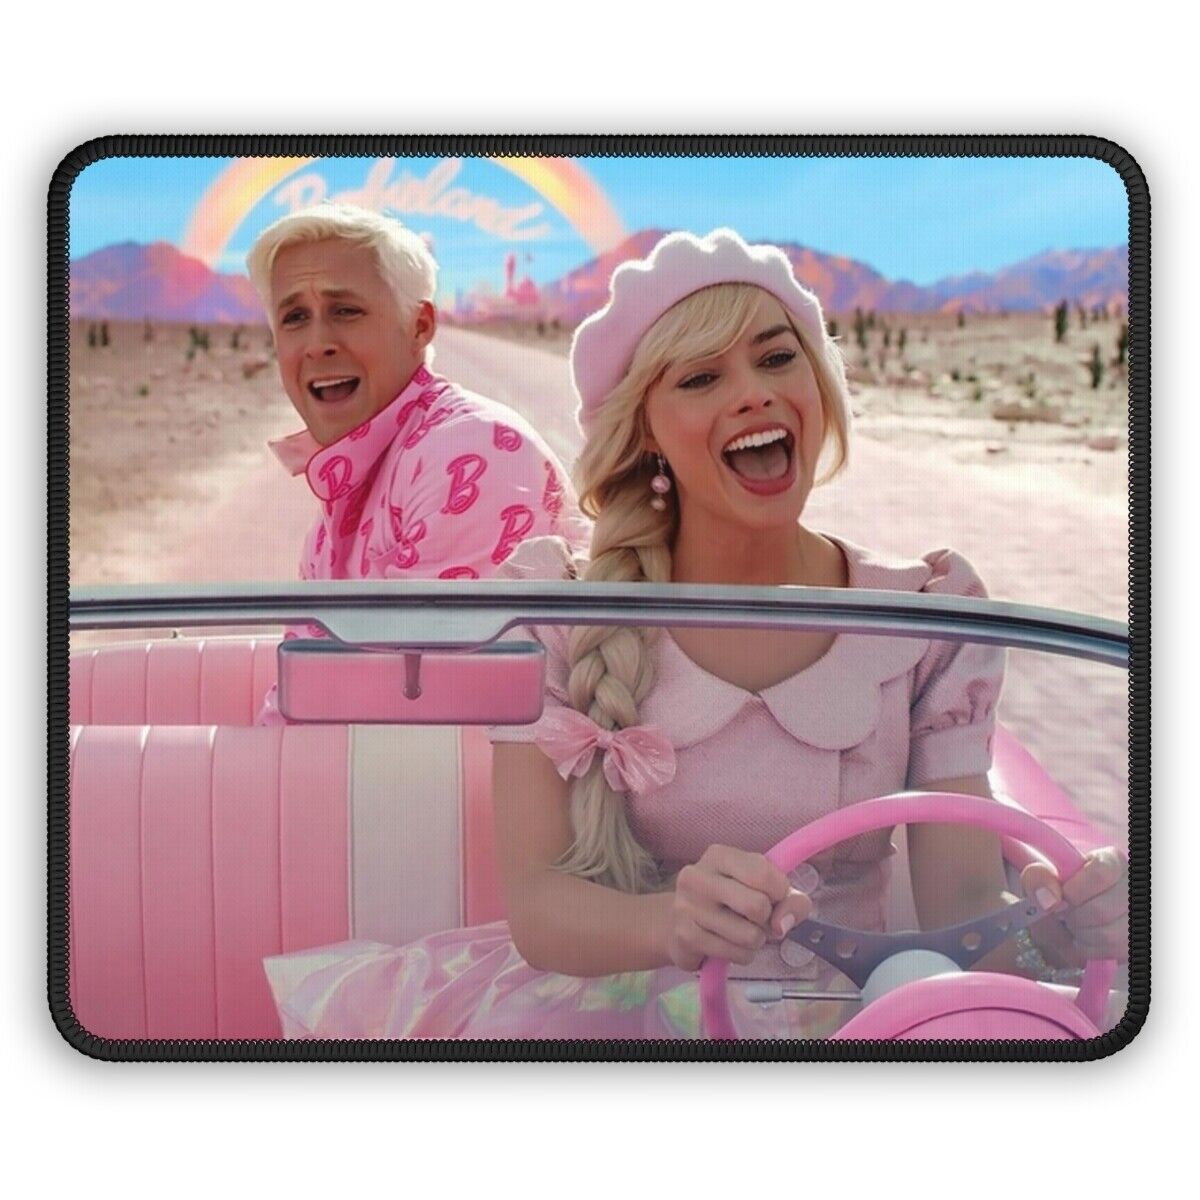 Barbie and Ken - Movie - Gaming Mouse Pad - 9x7